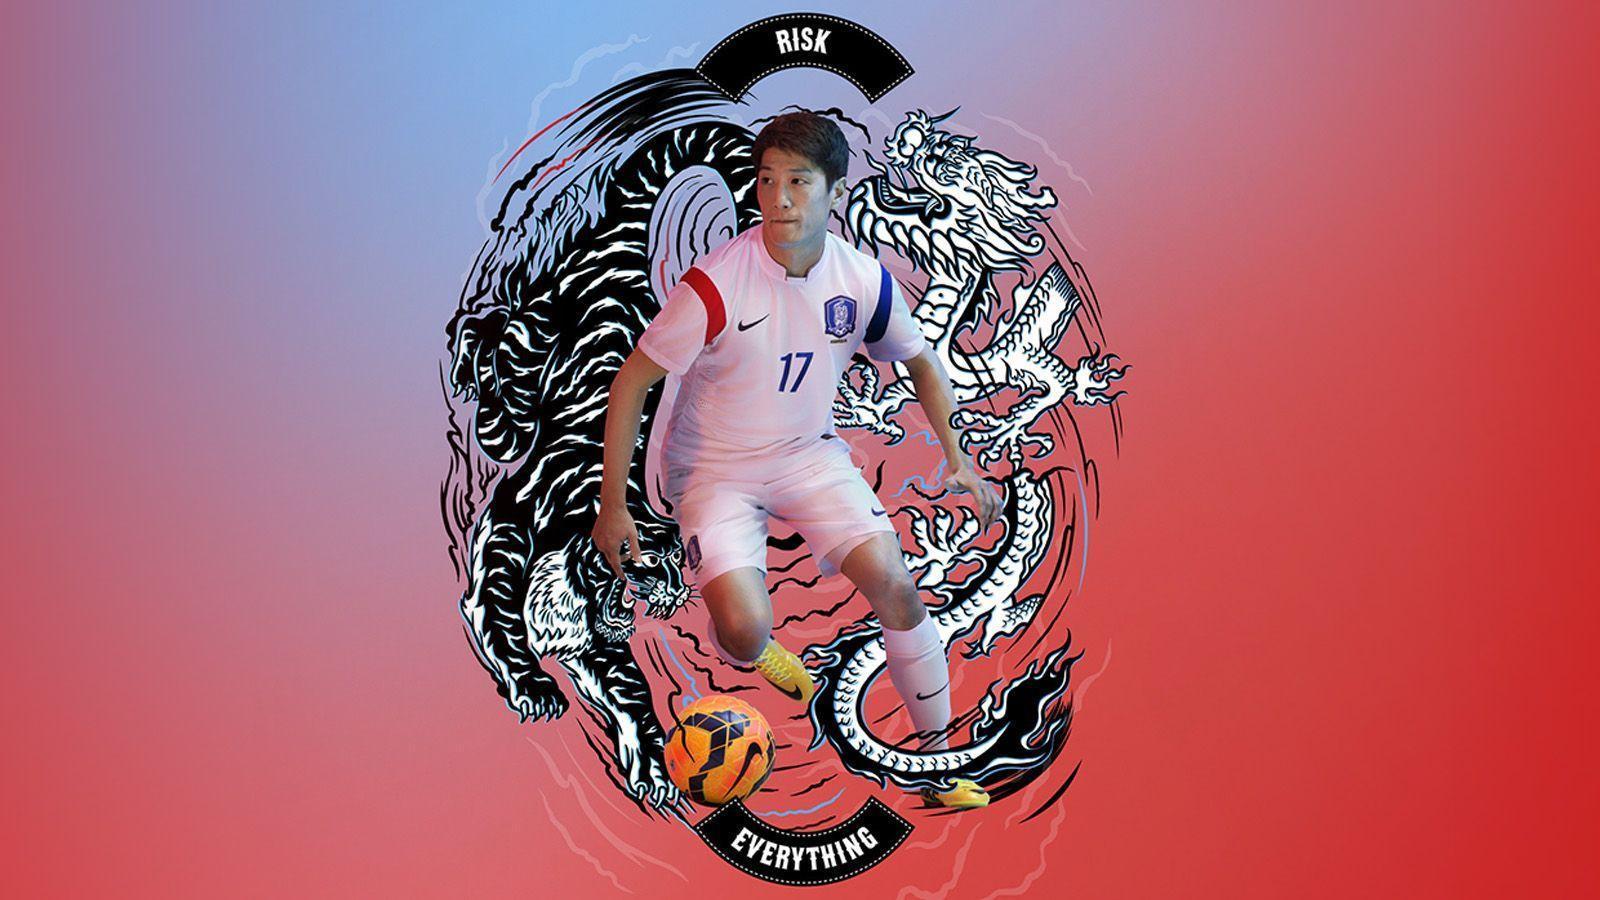 Spectacular Nike Risk Everything 2014 World Cup Kit Wallpaper